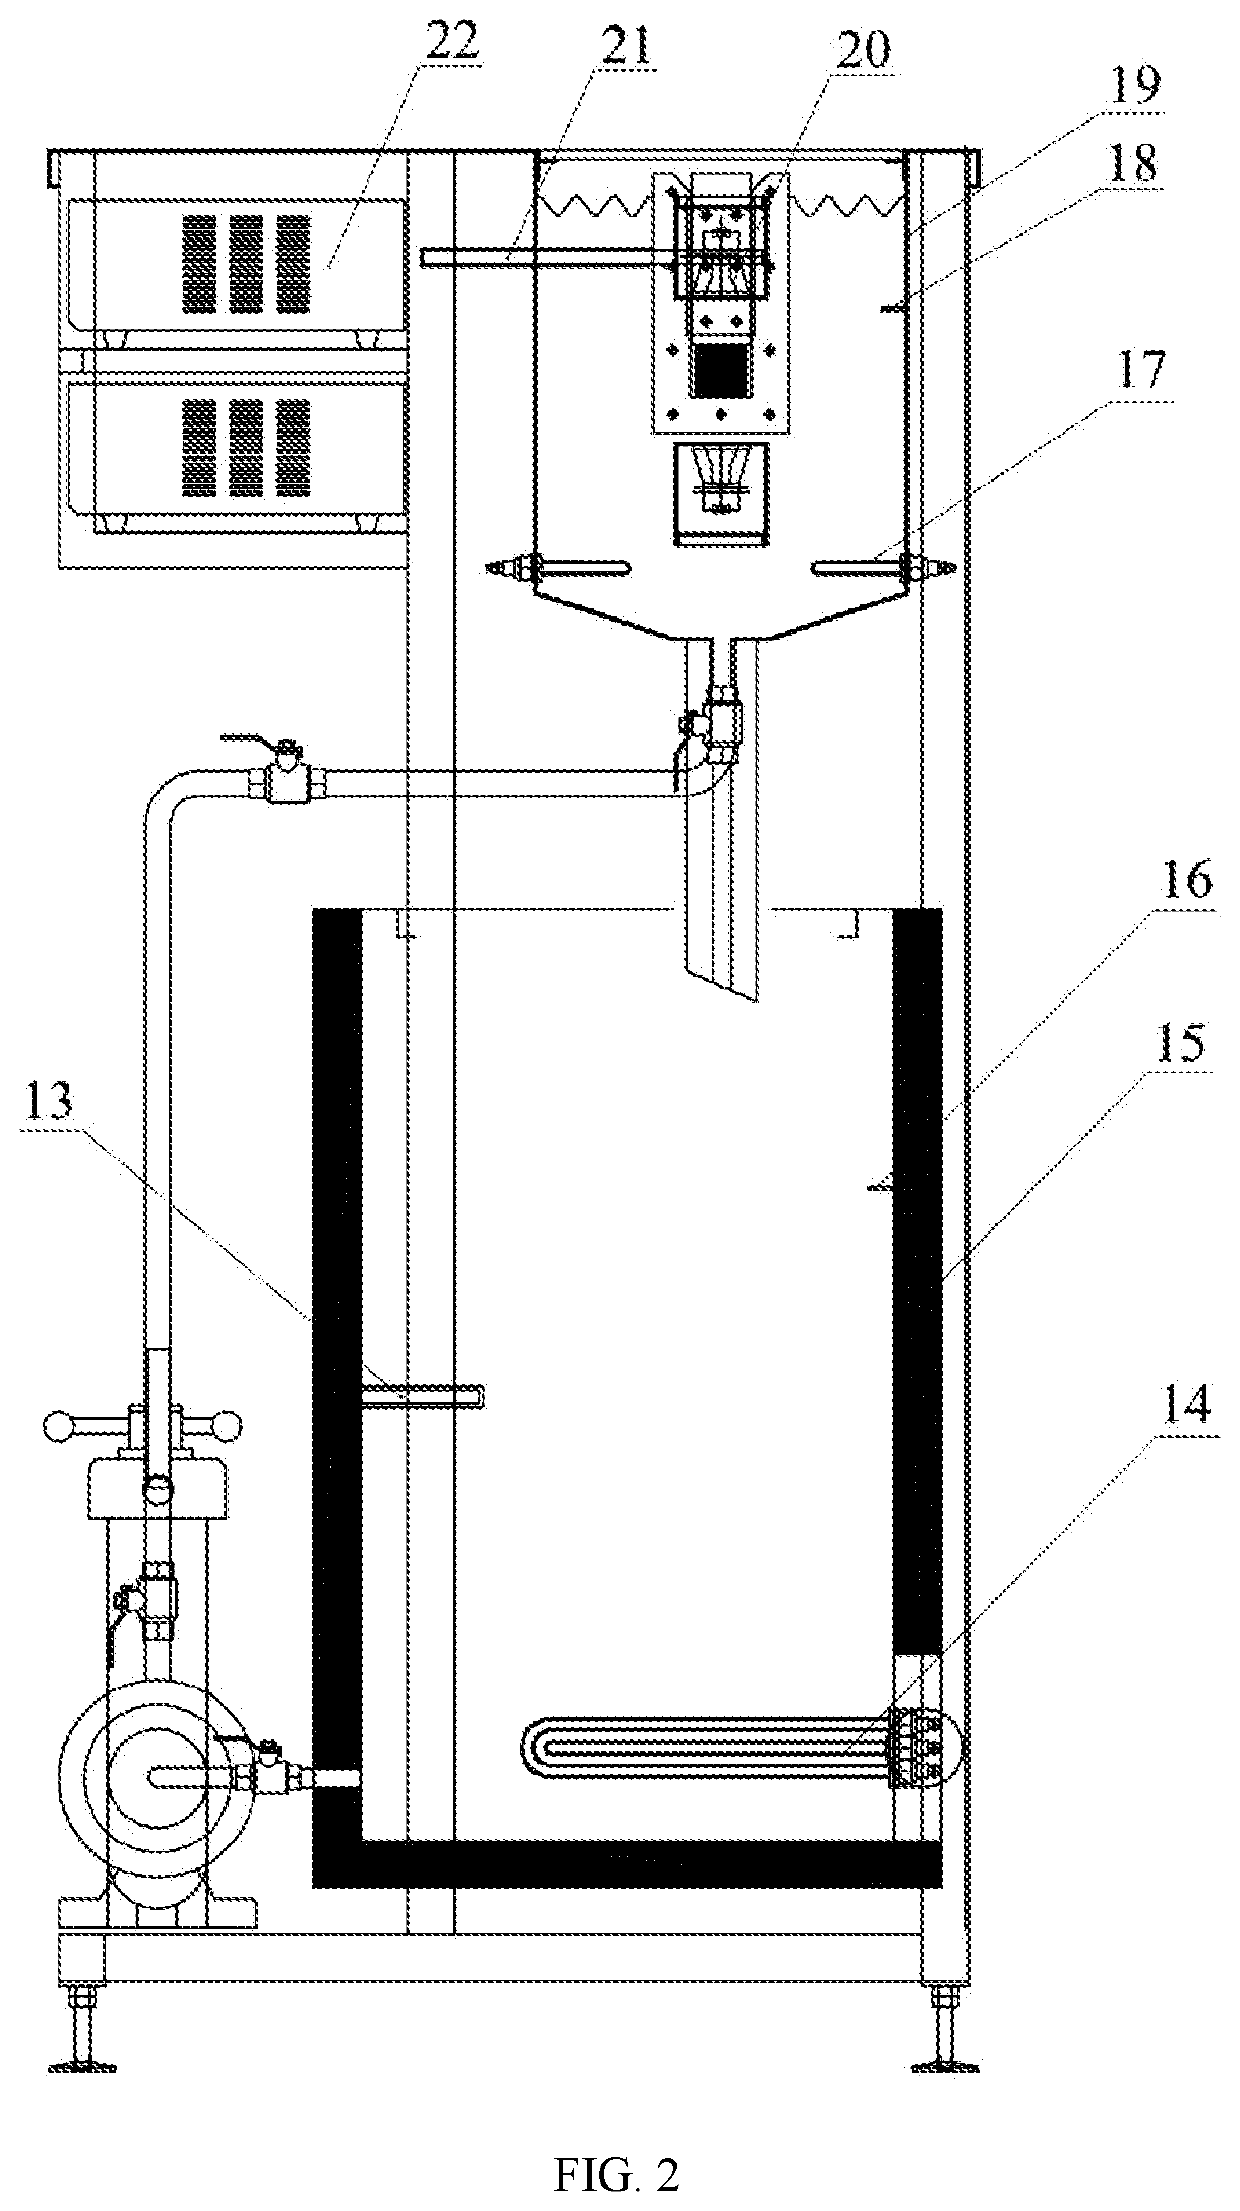 Feed-through ultrasonic cleaning system for winding of large-sized superconducting coils